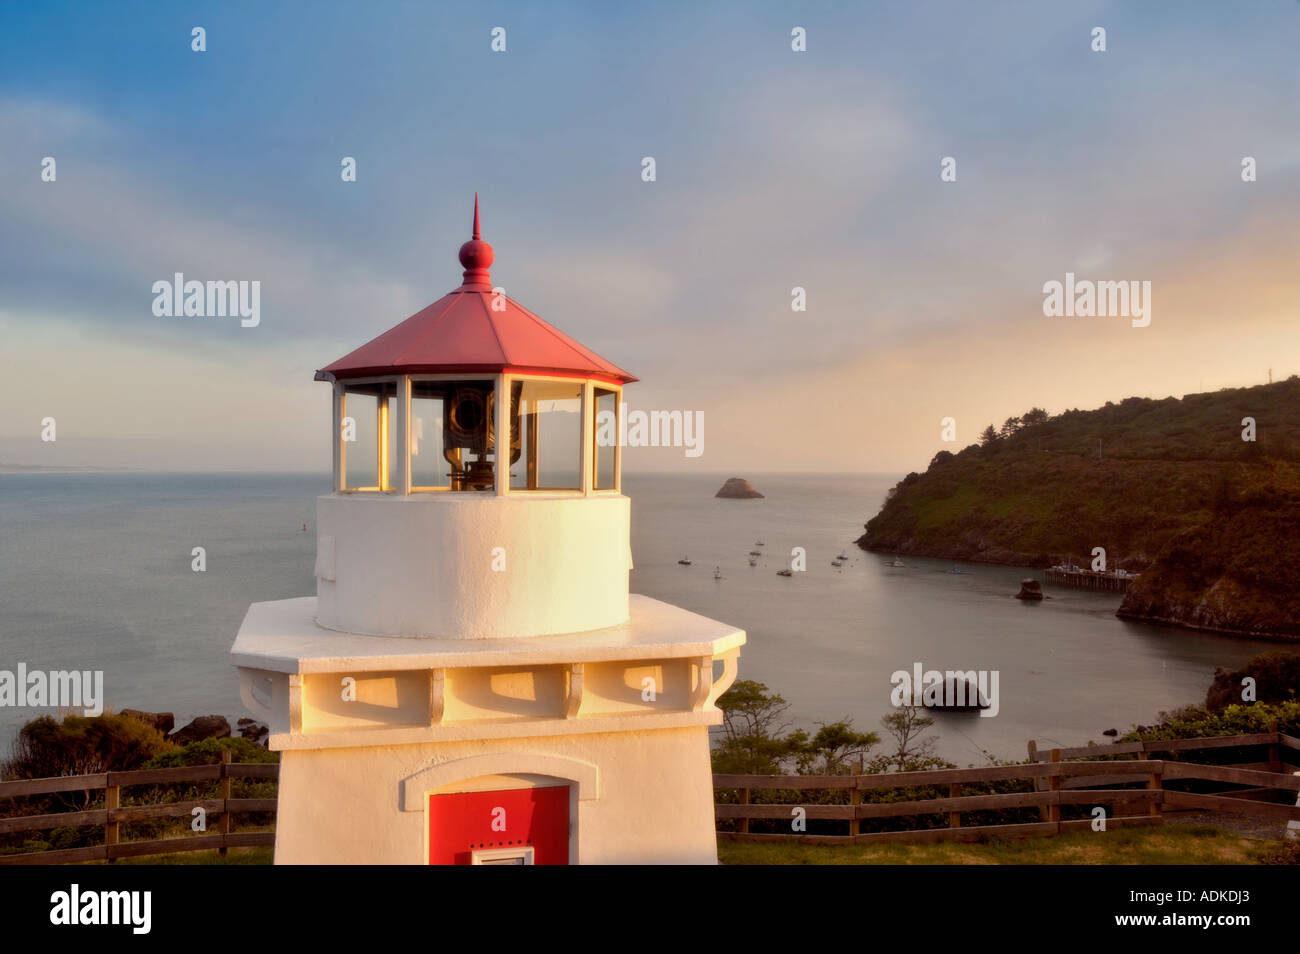 Trinidad Lighthouse with boats in harbor and sunset California Stock Photo